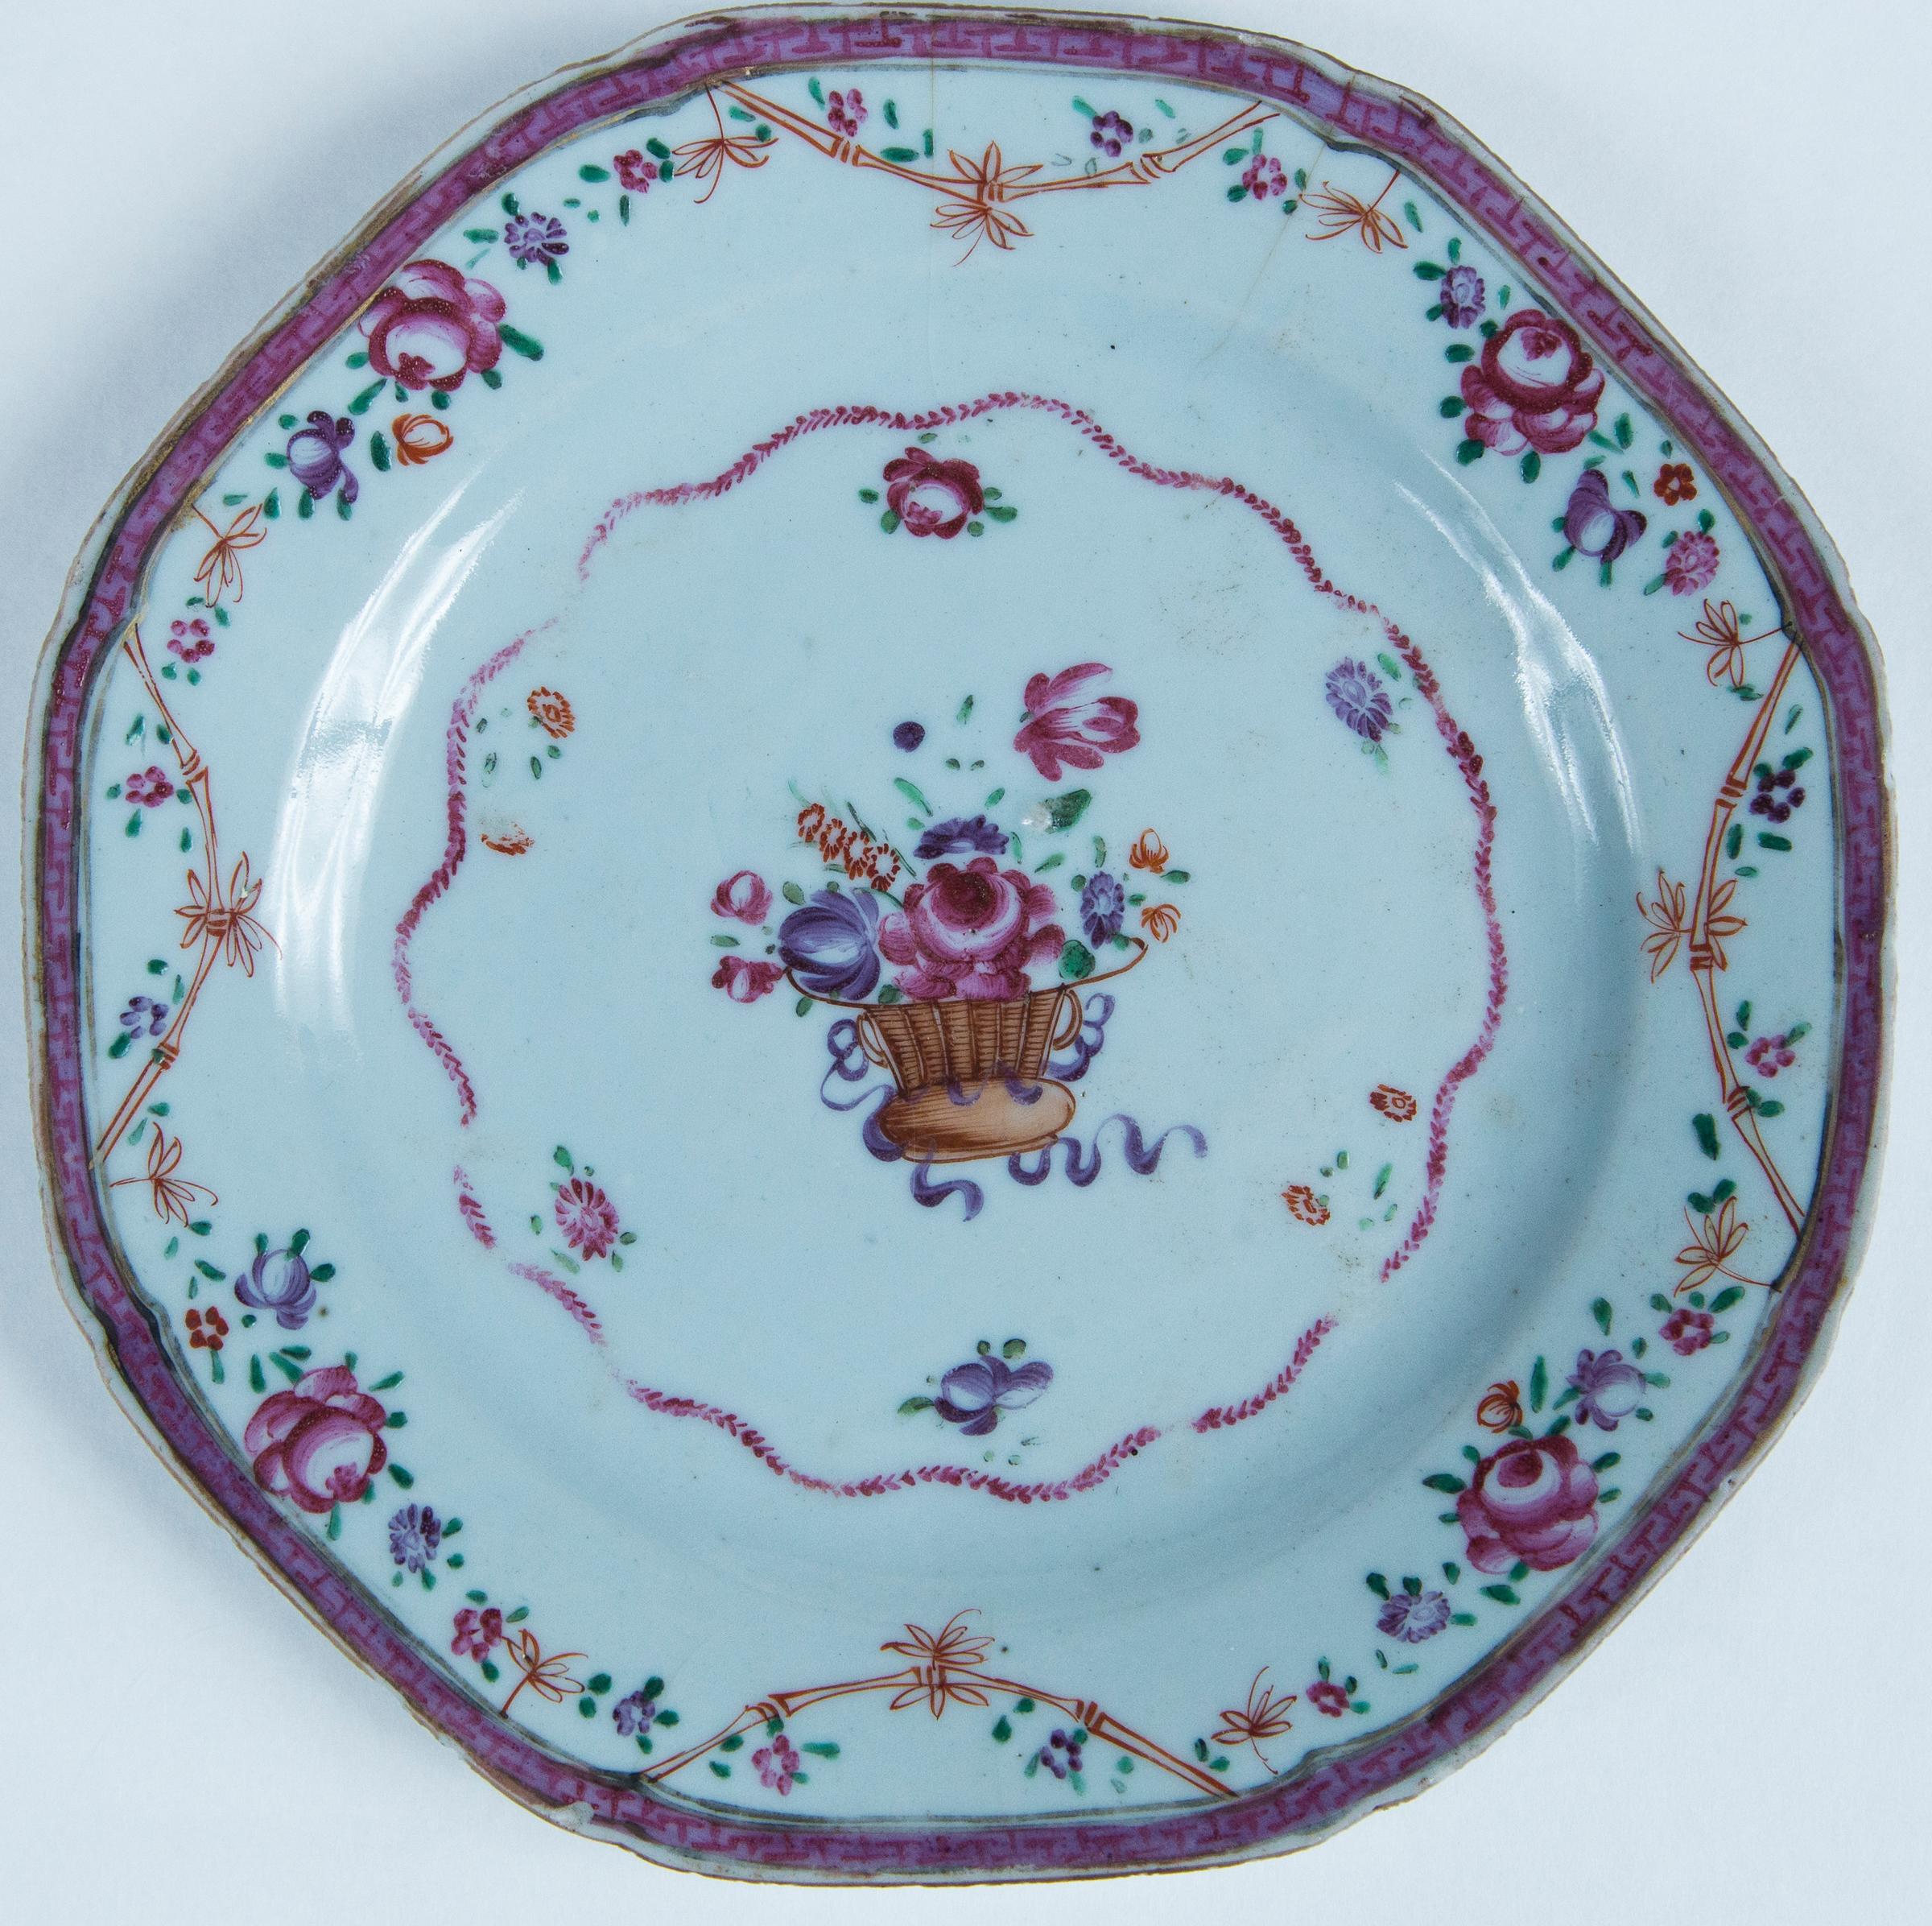 Two Chinese Export porcelain plates, Early 19th Century. Hand-painted polychrome floral designs with detailed borders.